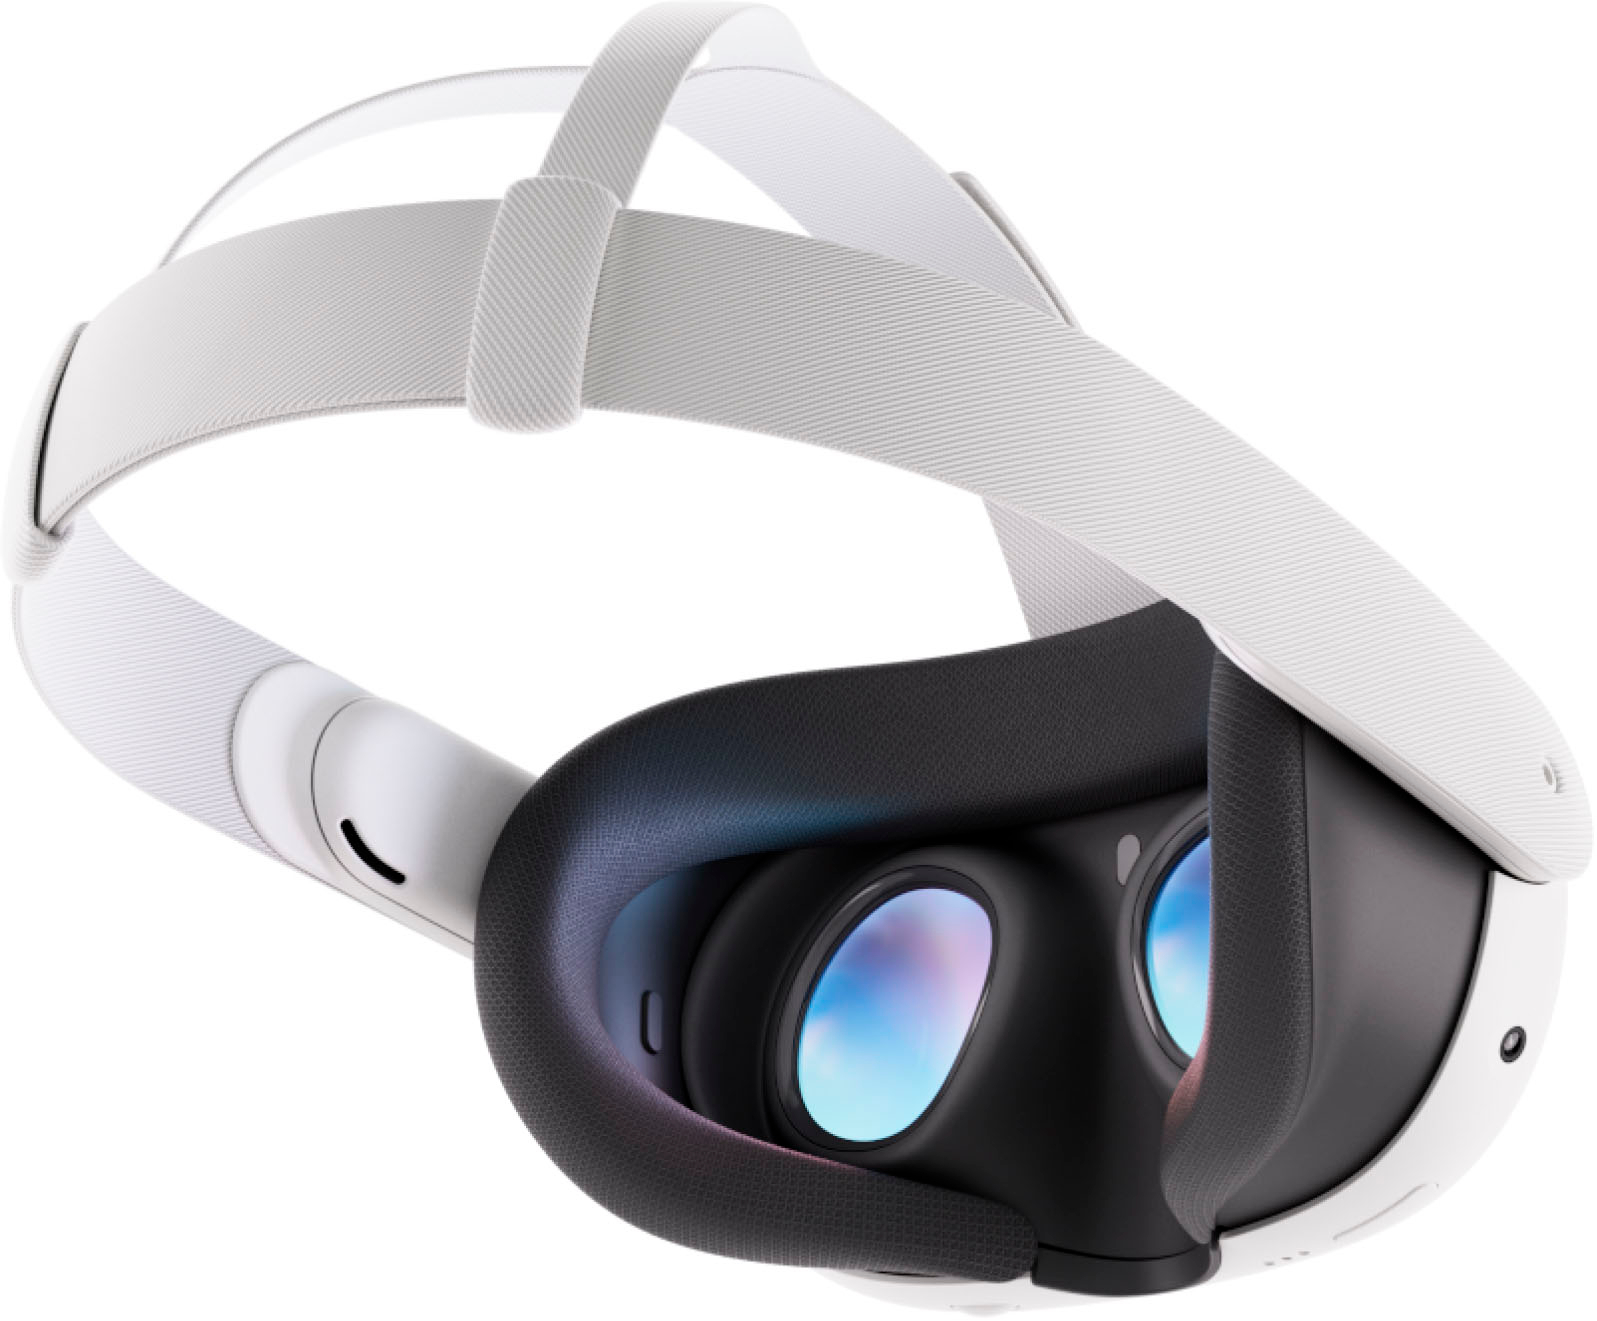 Meta Quest 3 Breakthrough Mixed Reality 128GB White 899-00579-01 - Best Buy